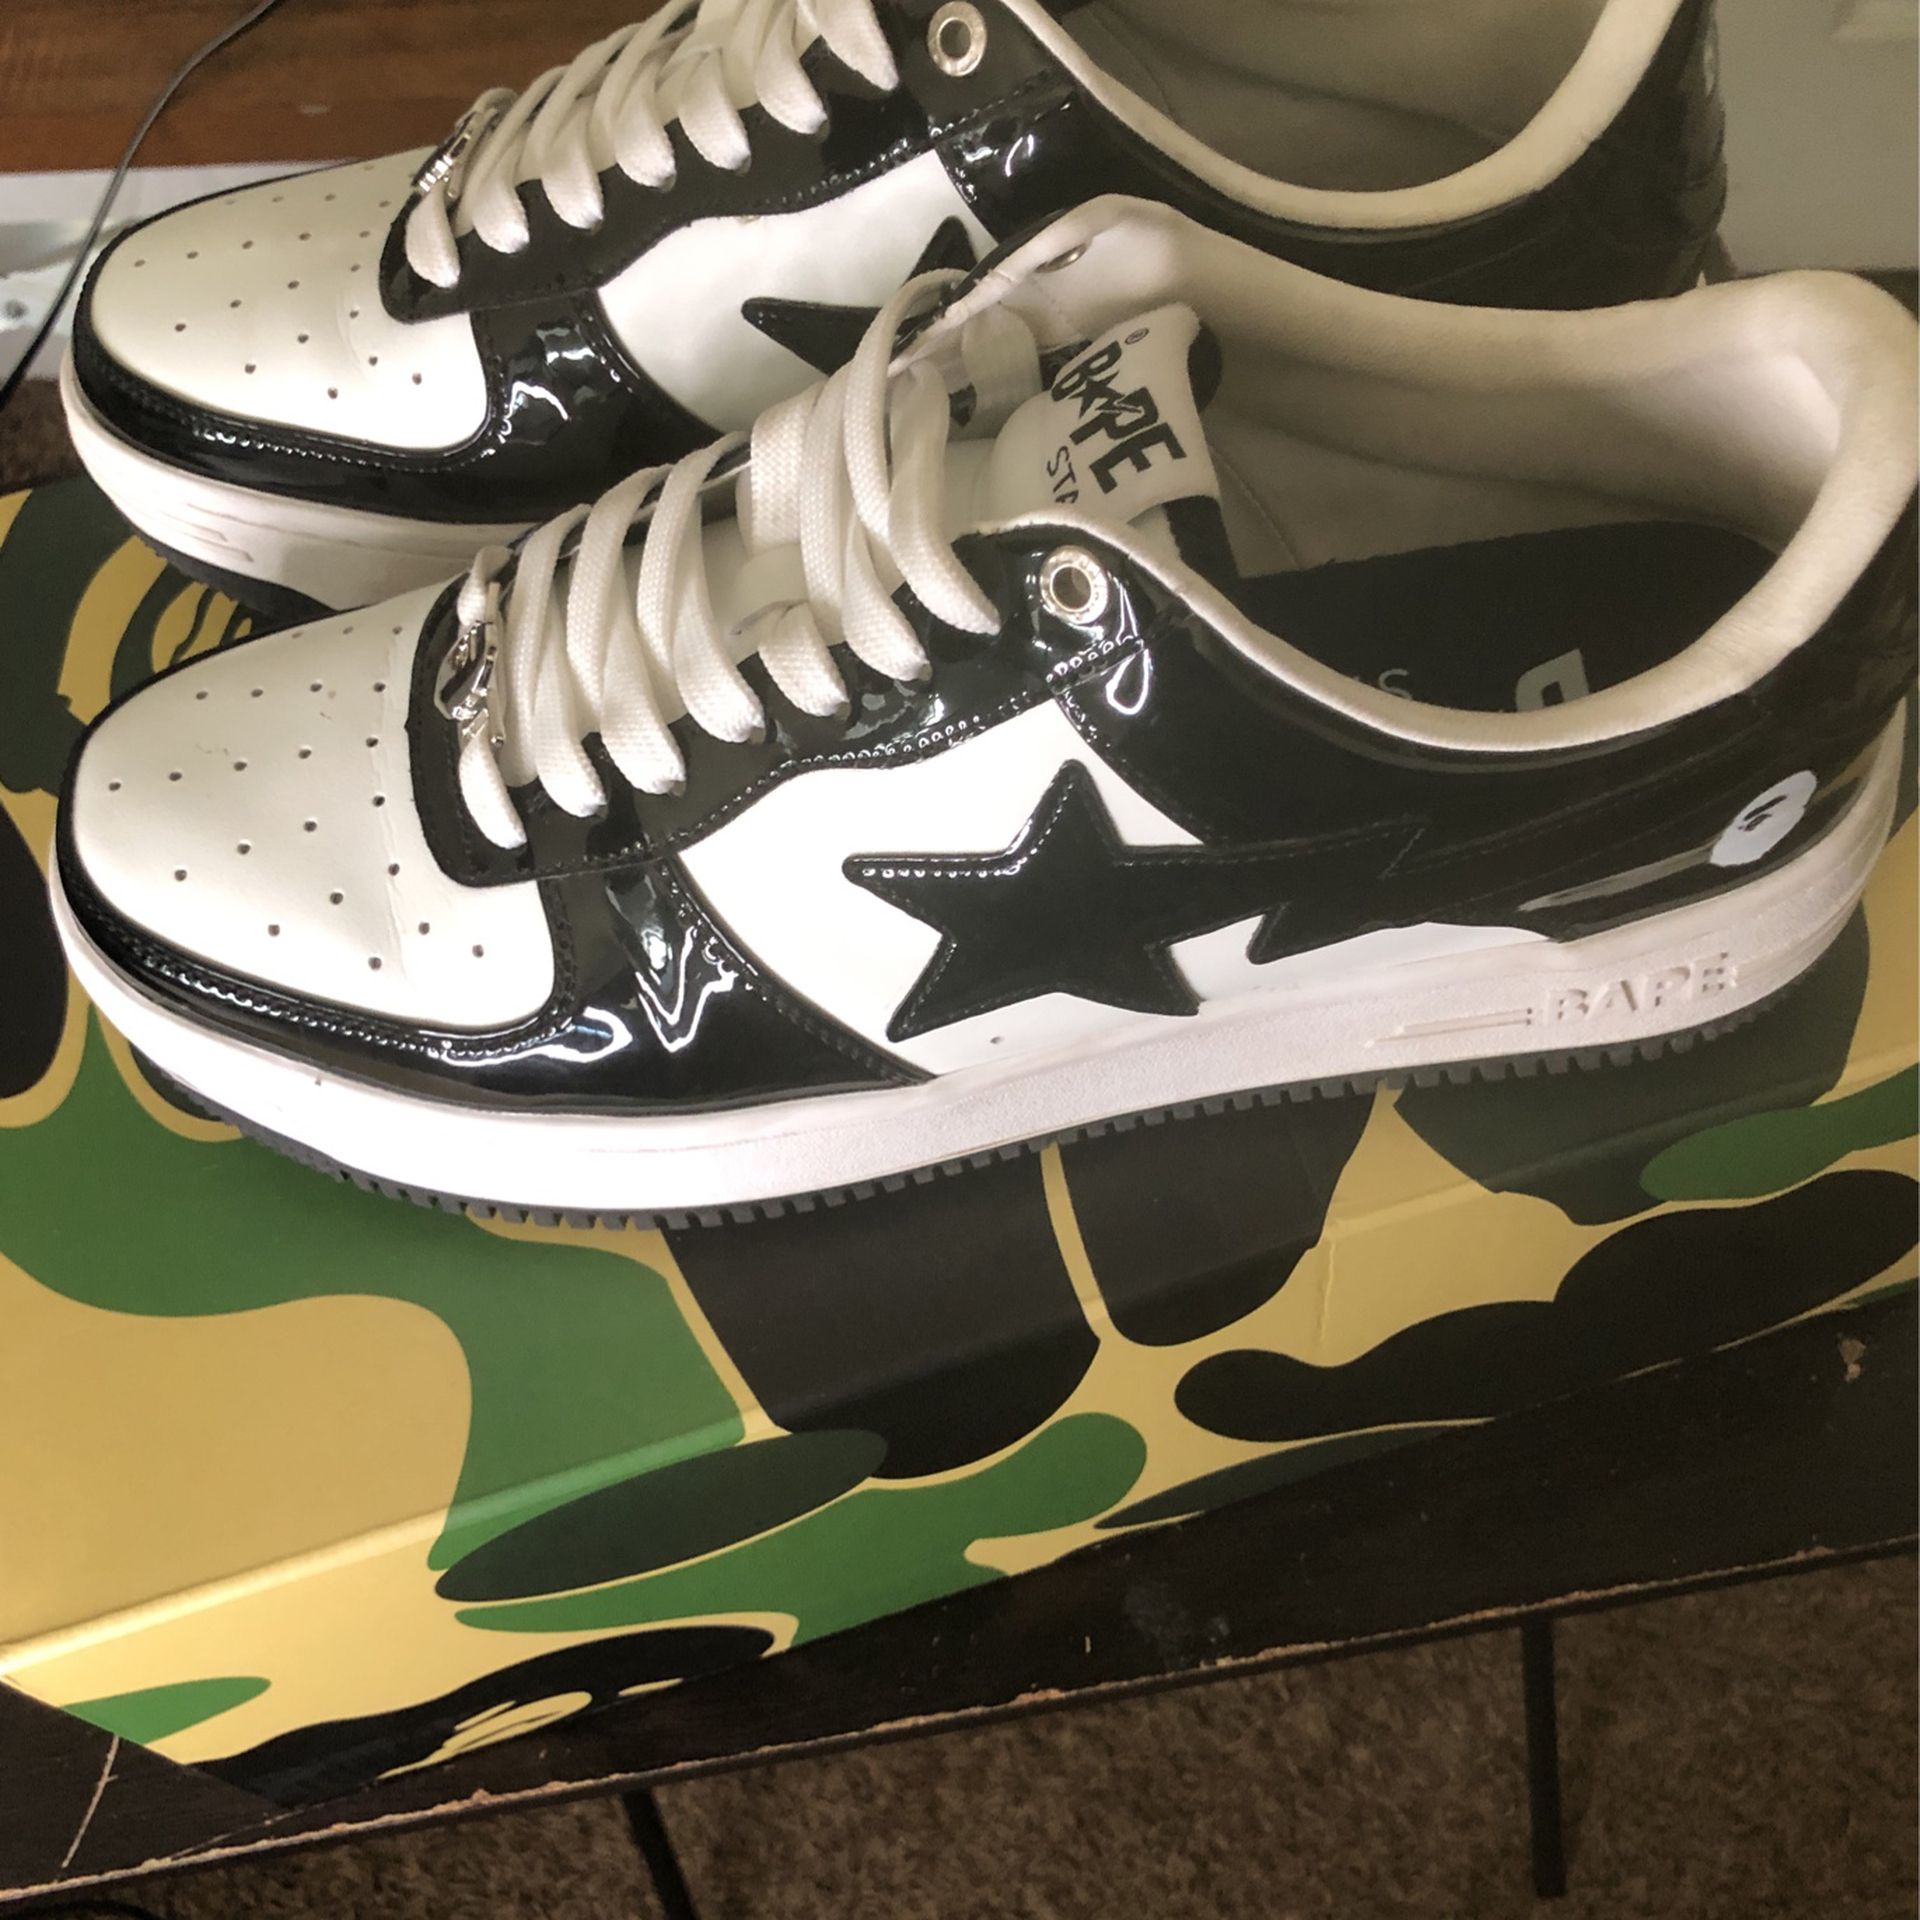 Black And White Bapestas Shoes for Sale in Victorville, CA - OfferUp